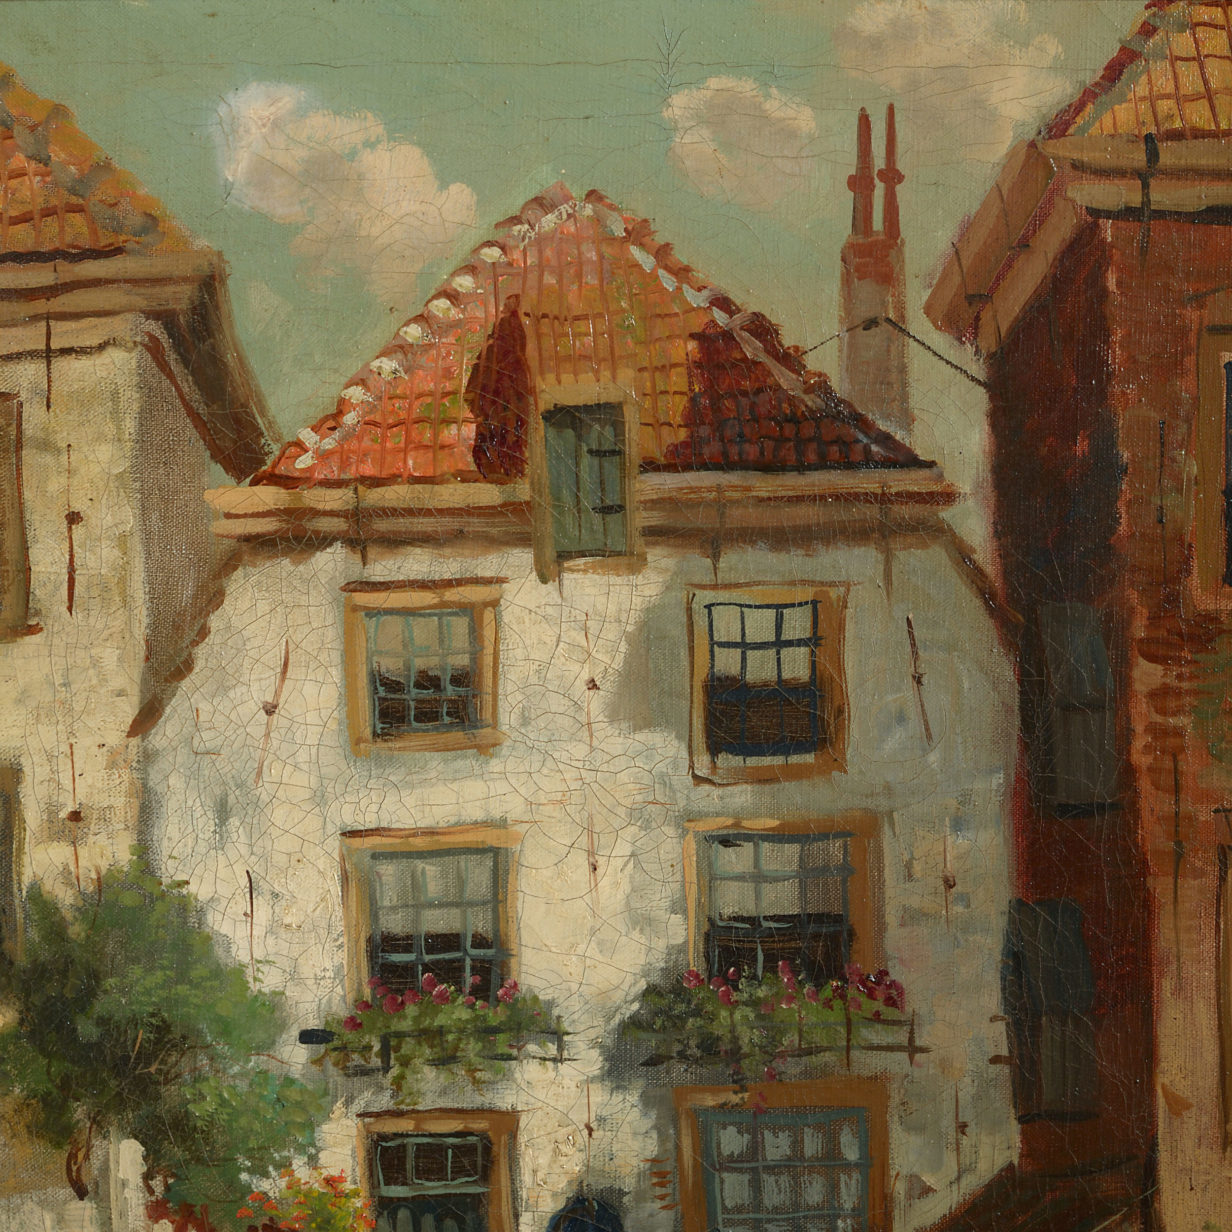 An early 20th century impressionist townscape